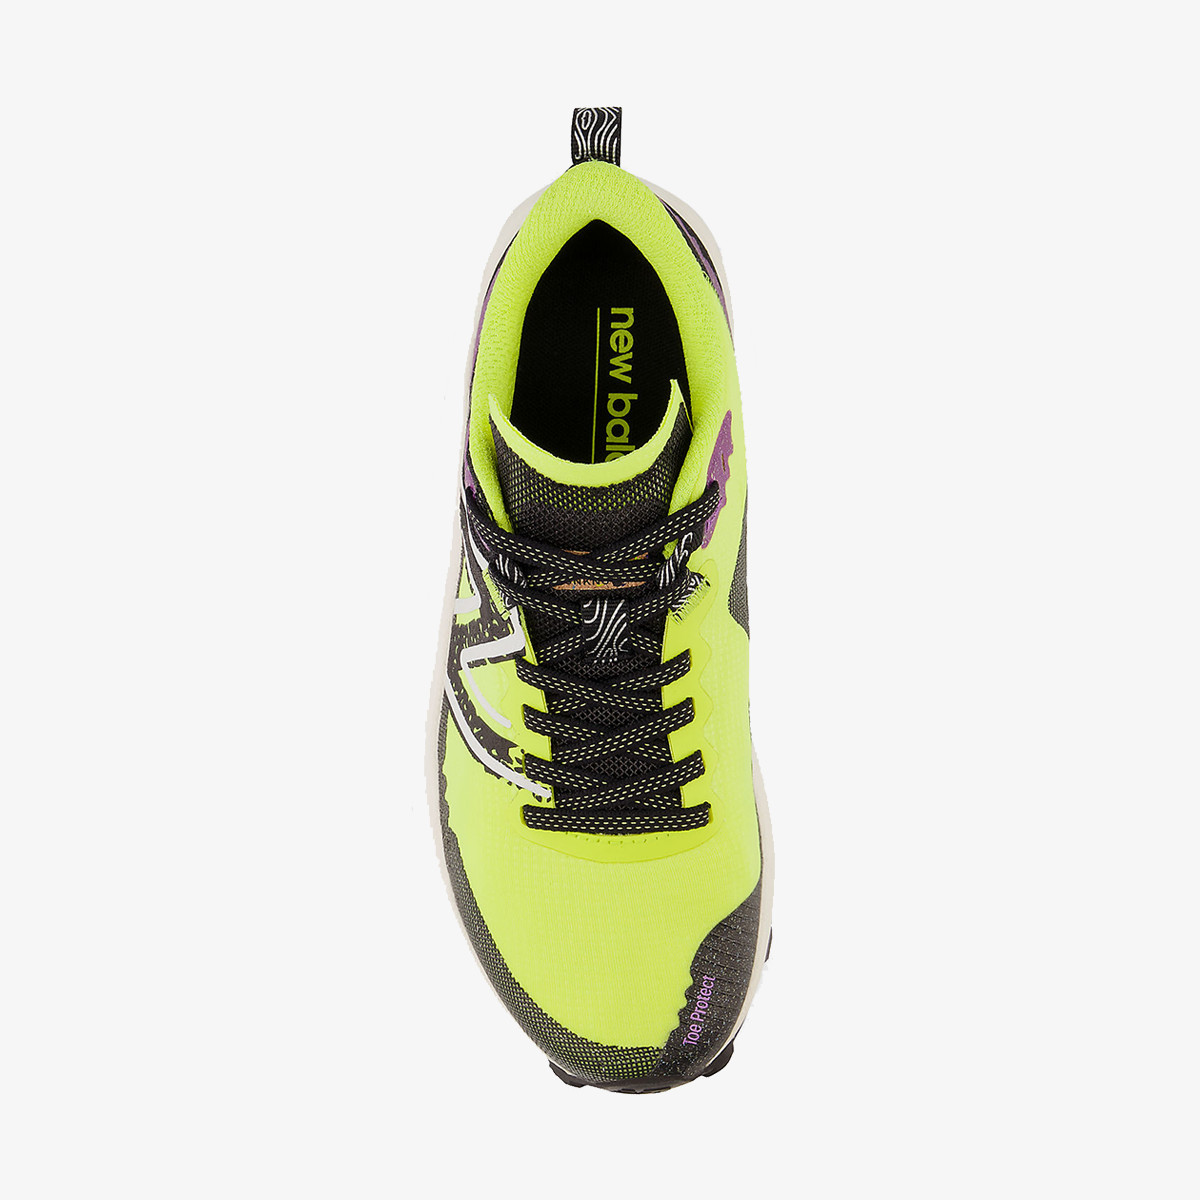 New Balance Fuelcell Sumit 